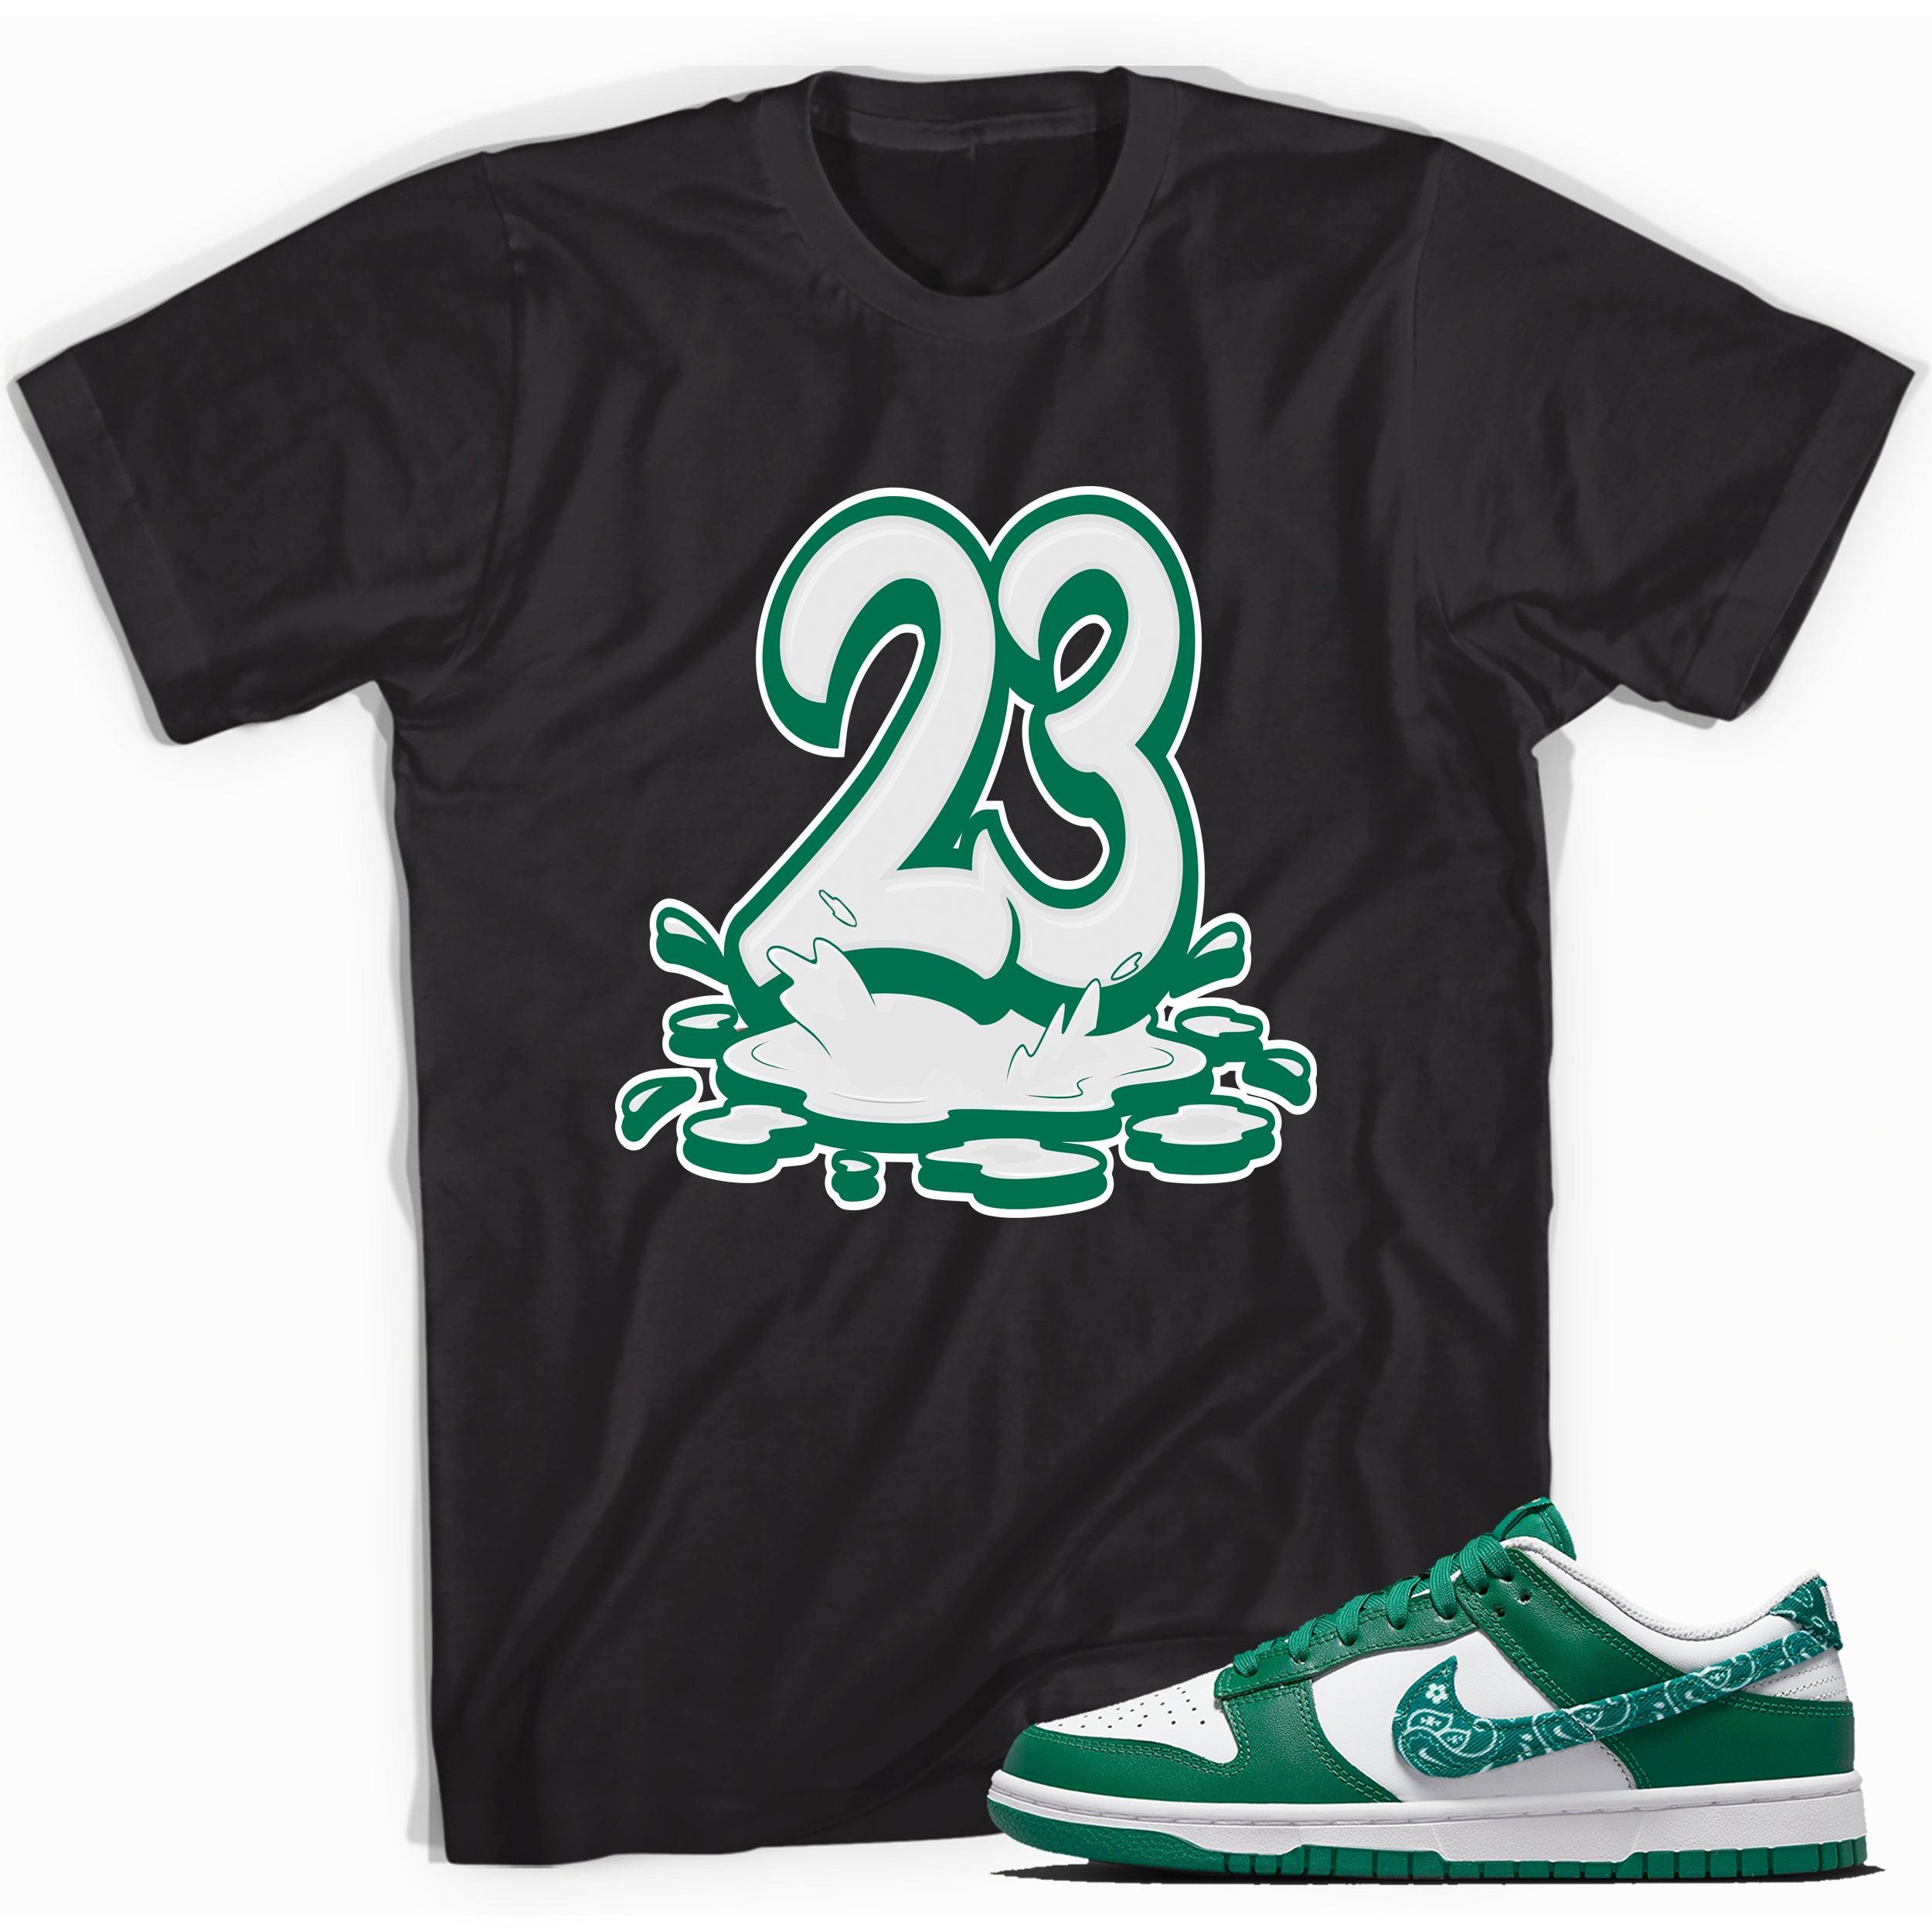 23 Melting Shirt Nike Dunk Low Essential Paisley Pack Green photo